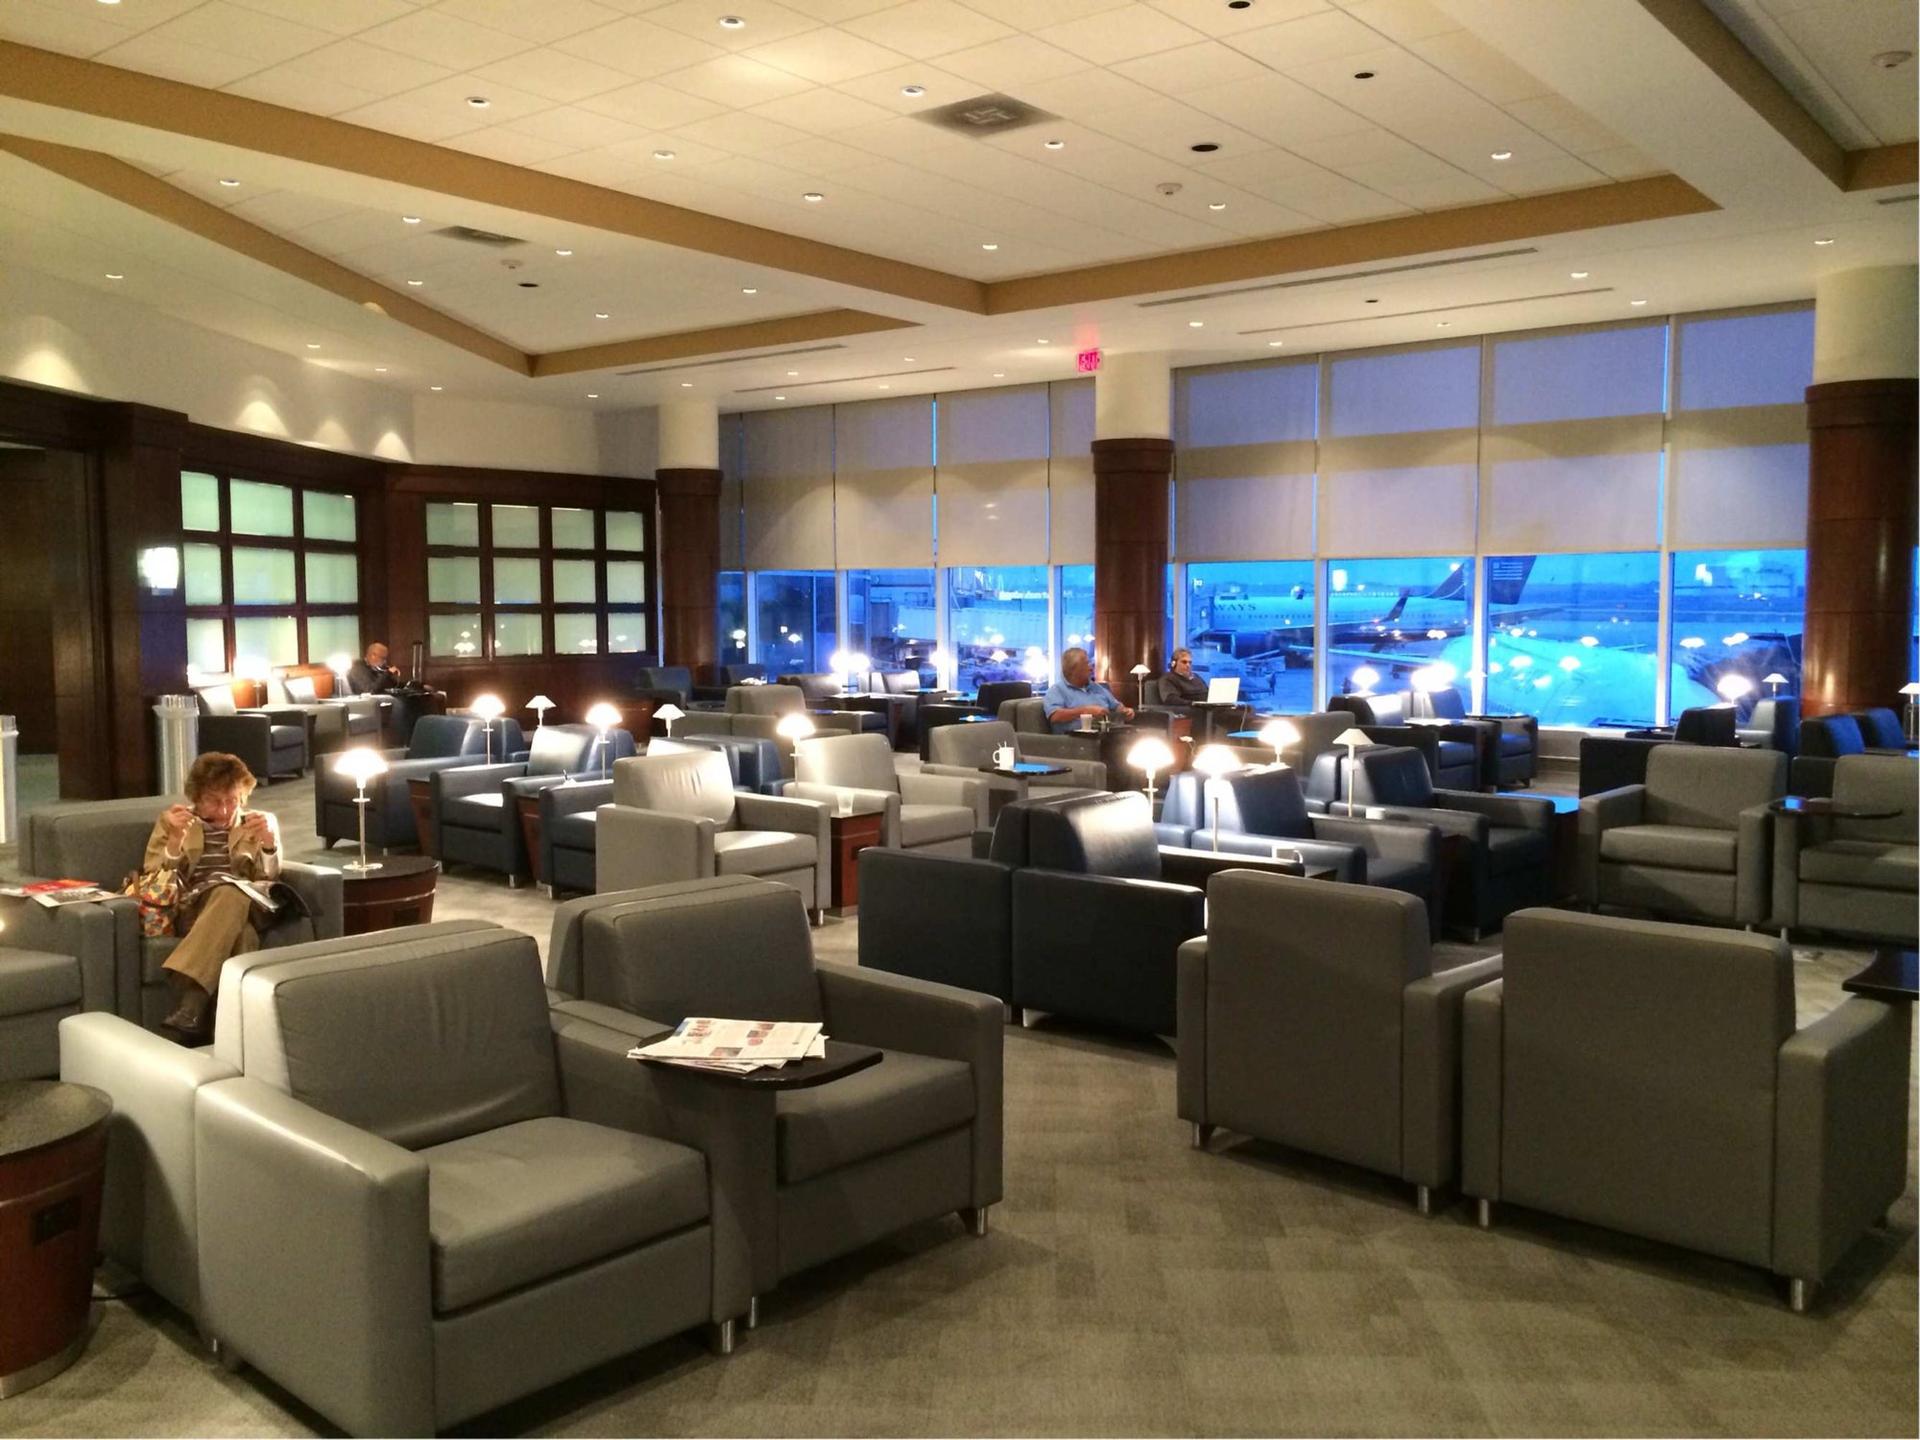 American Airlines Admirals Club image 4 of 37